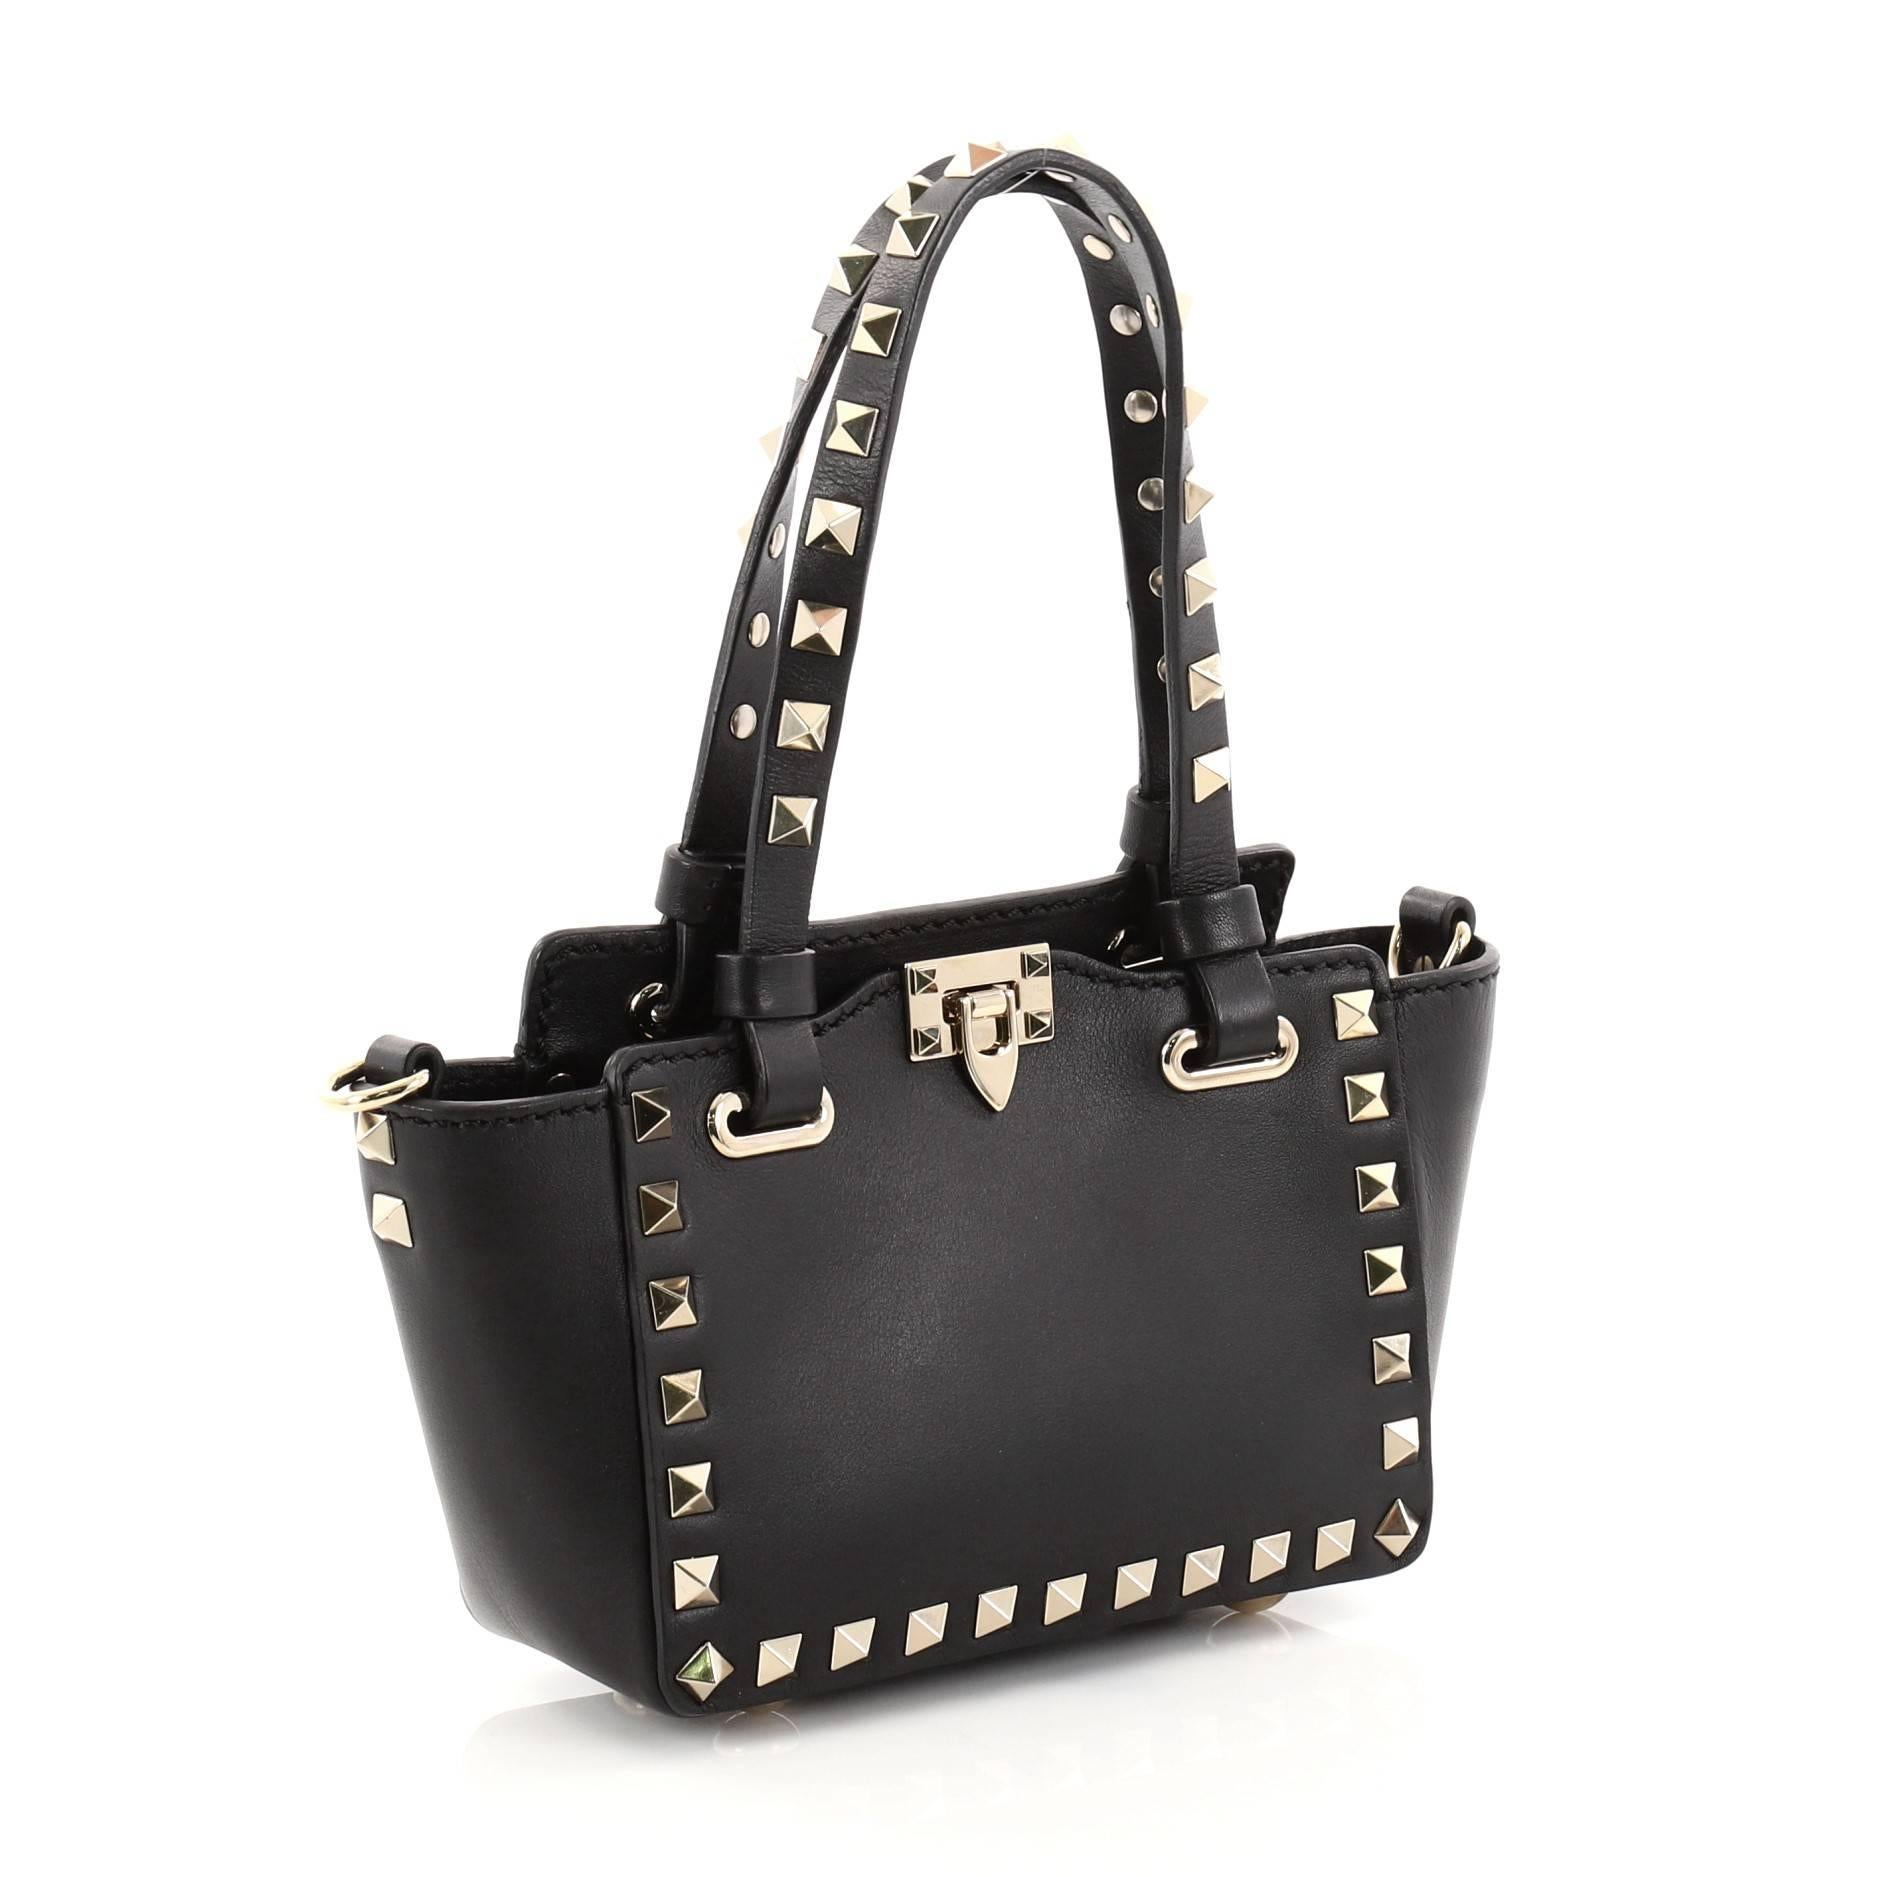 This authentic Valentino Rockstud Tote Soft Leather Micro mixes edgy style with luxurious detailing. Crafted from black soft leather, this stylish tote features dual tall flat handles, gold-tone pyramid stud trim details, a signature clasp